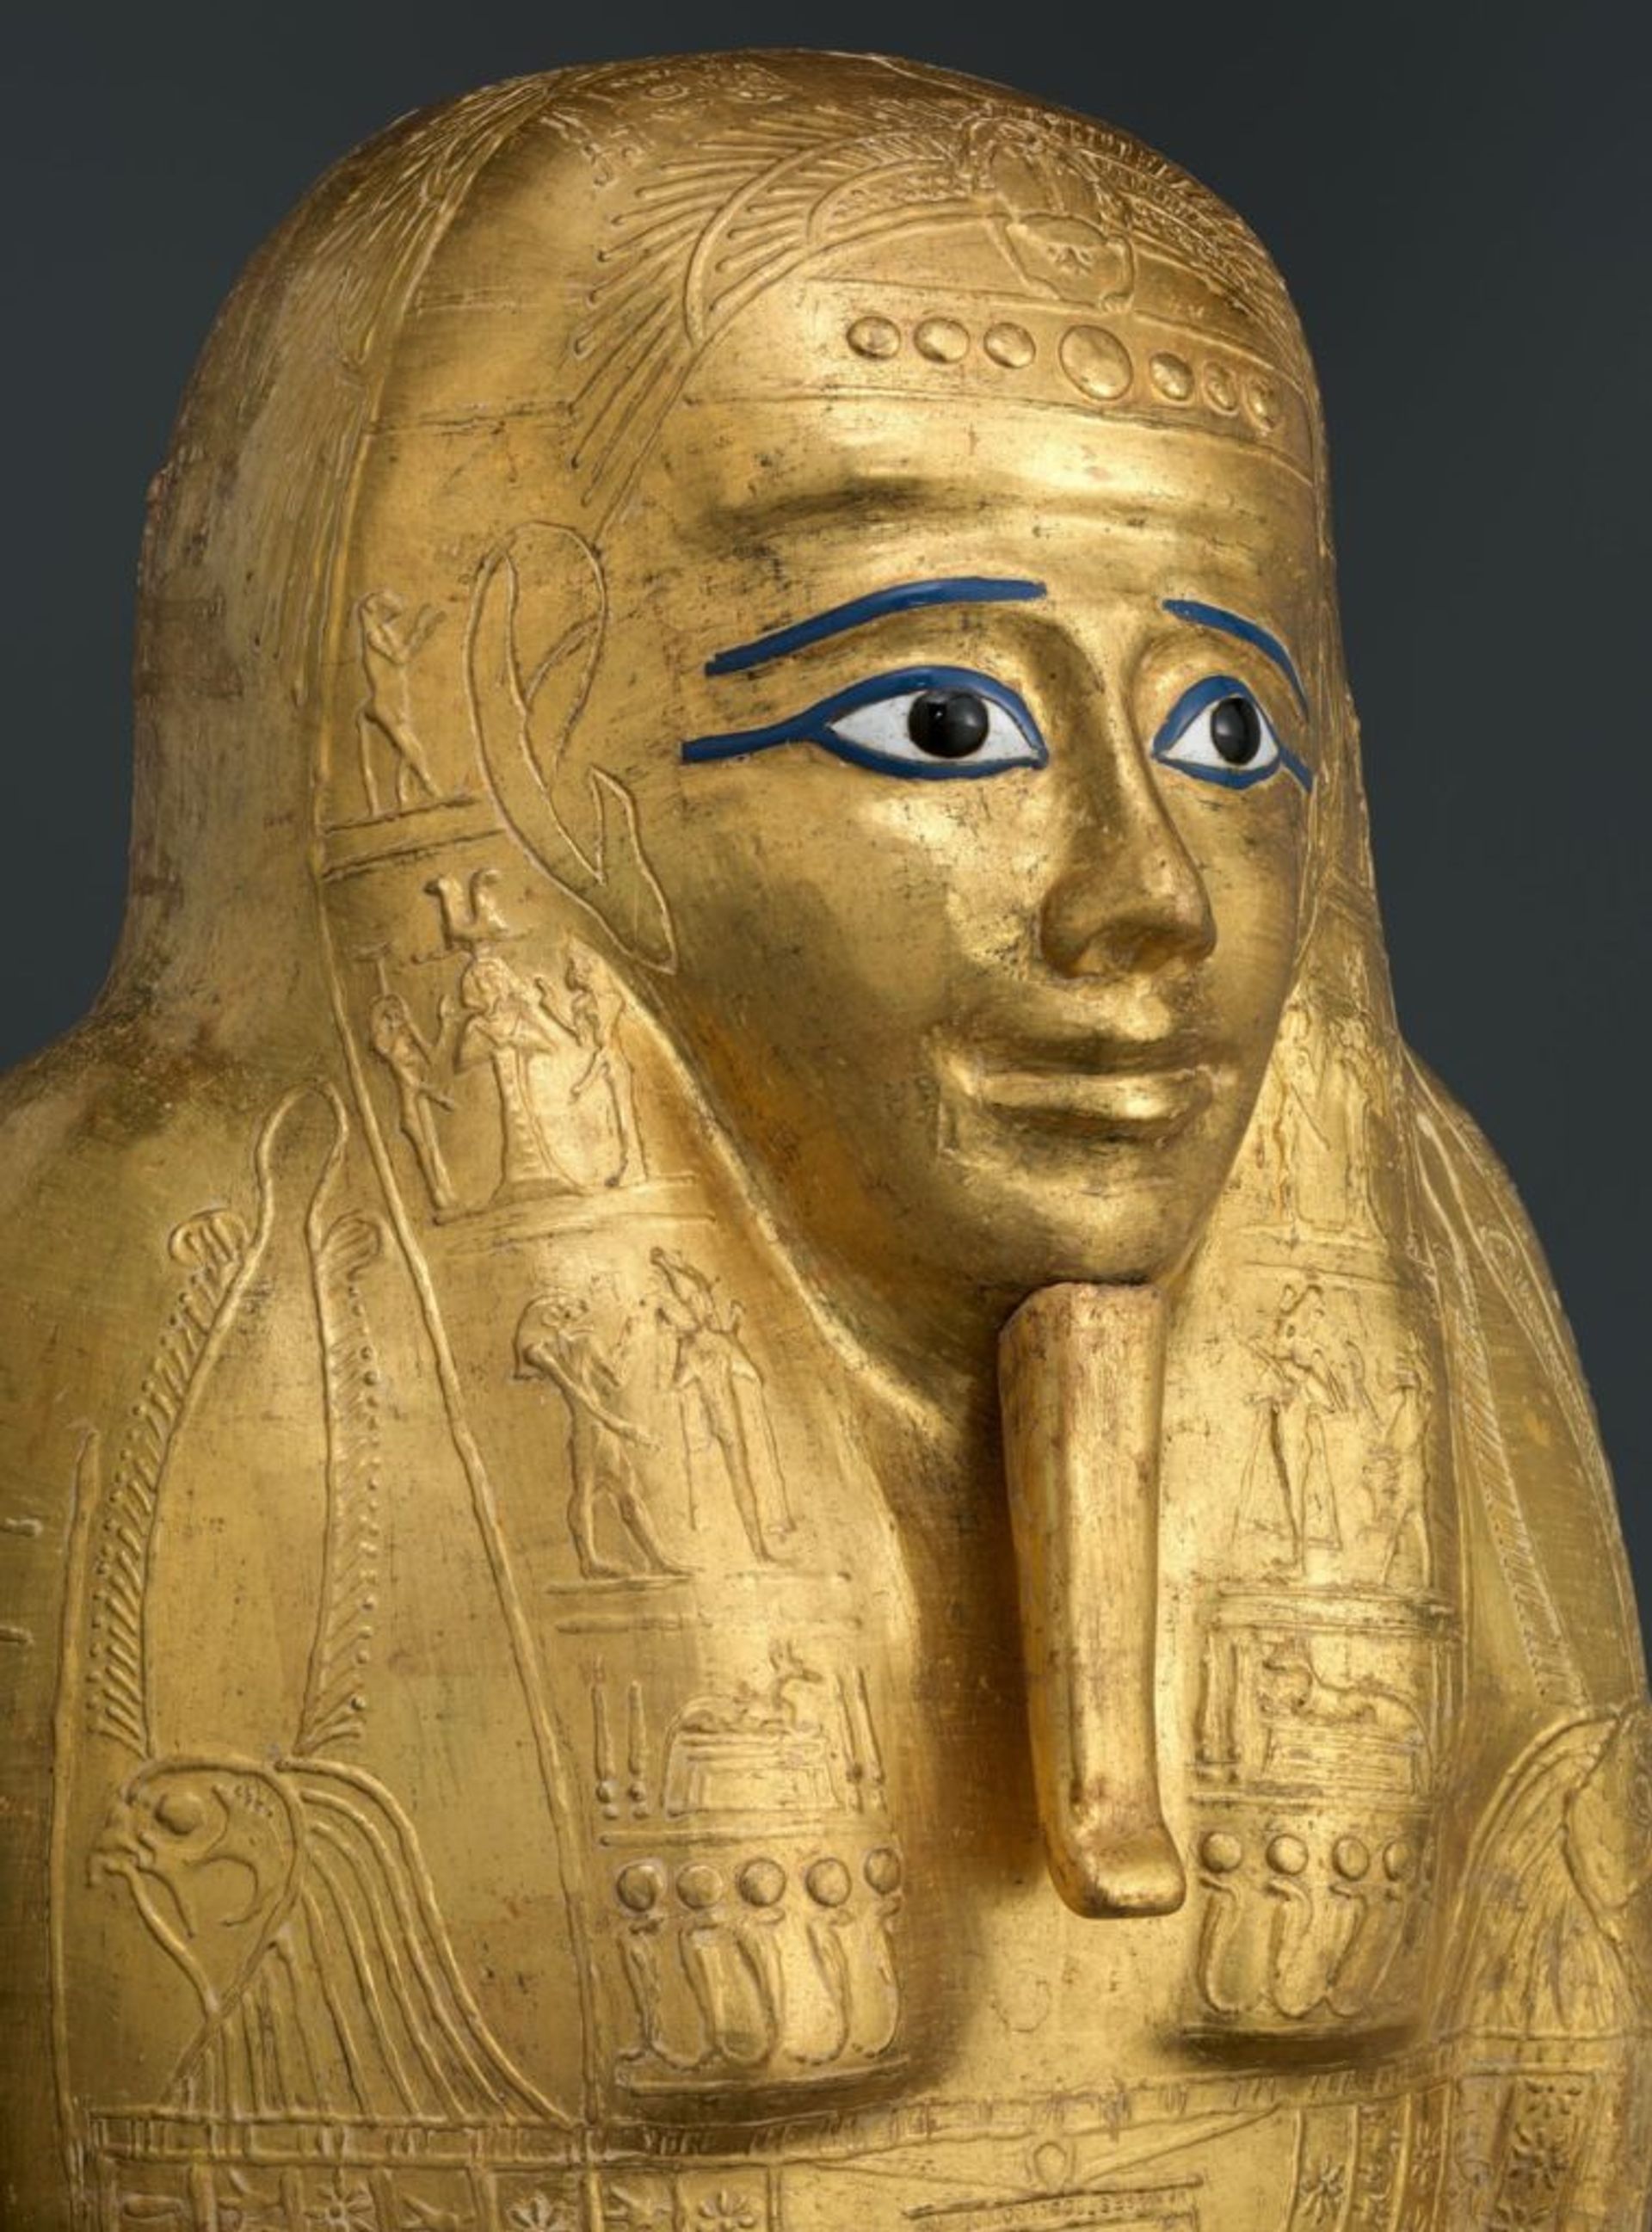 The gilded sarcophagus of Nedjemankh, which was              returned to Egypt in 2019              Courtesy of the Metropolitan Museum of Art